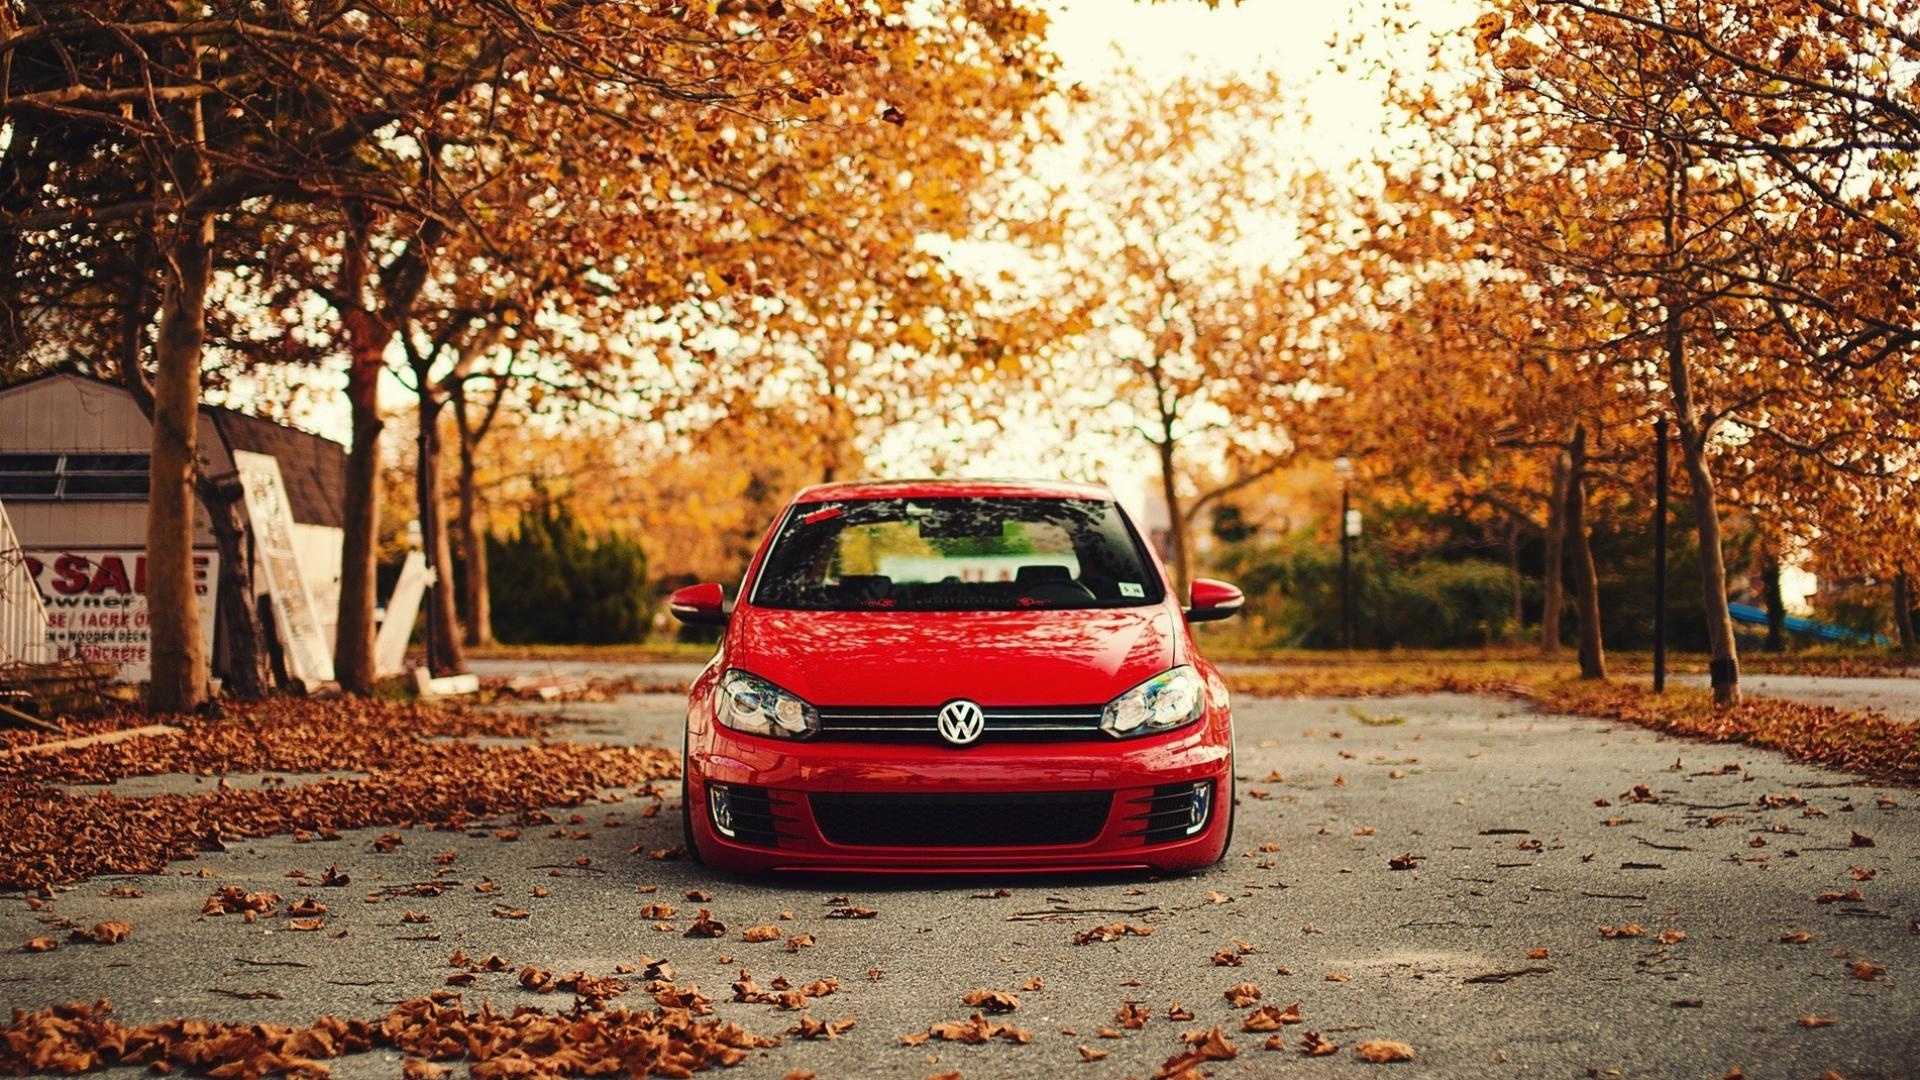 Volkswagen Golf, Nature-themed wallpapers, Leaves and trees, Golf R, 1920x1080 Full HD Desktop